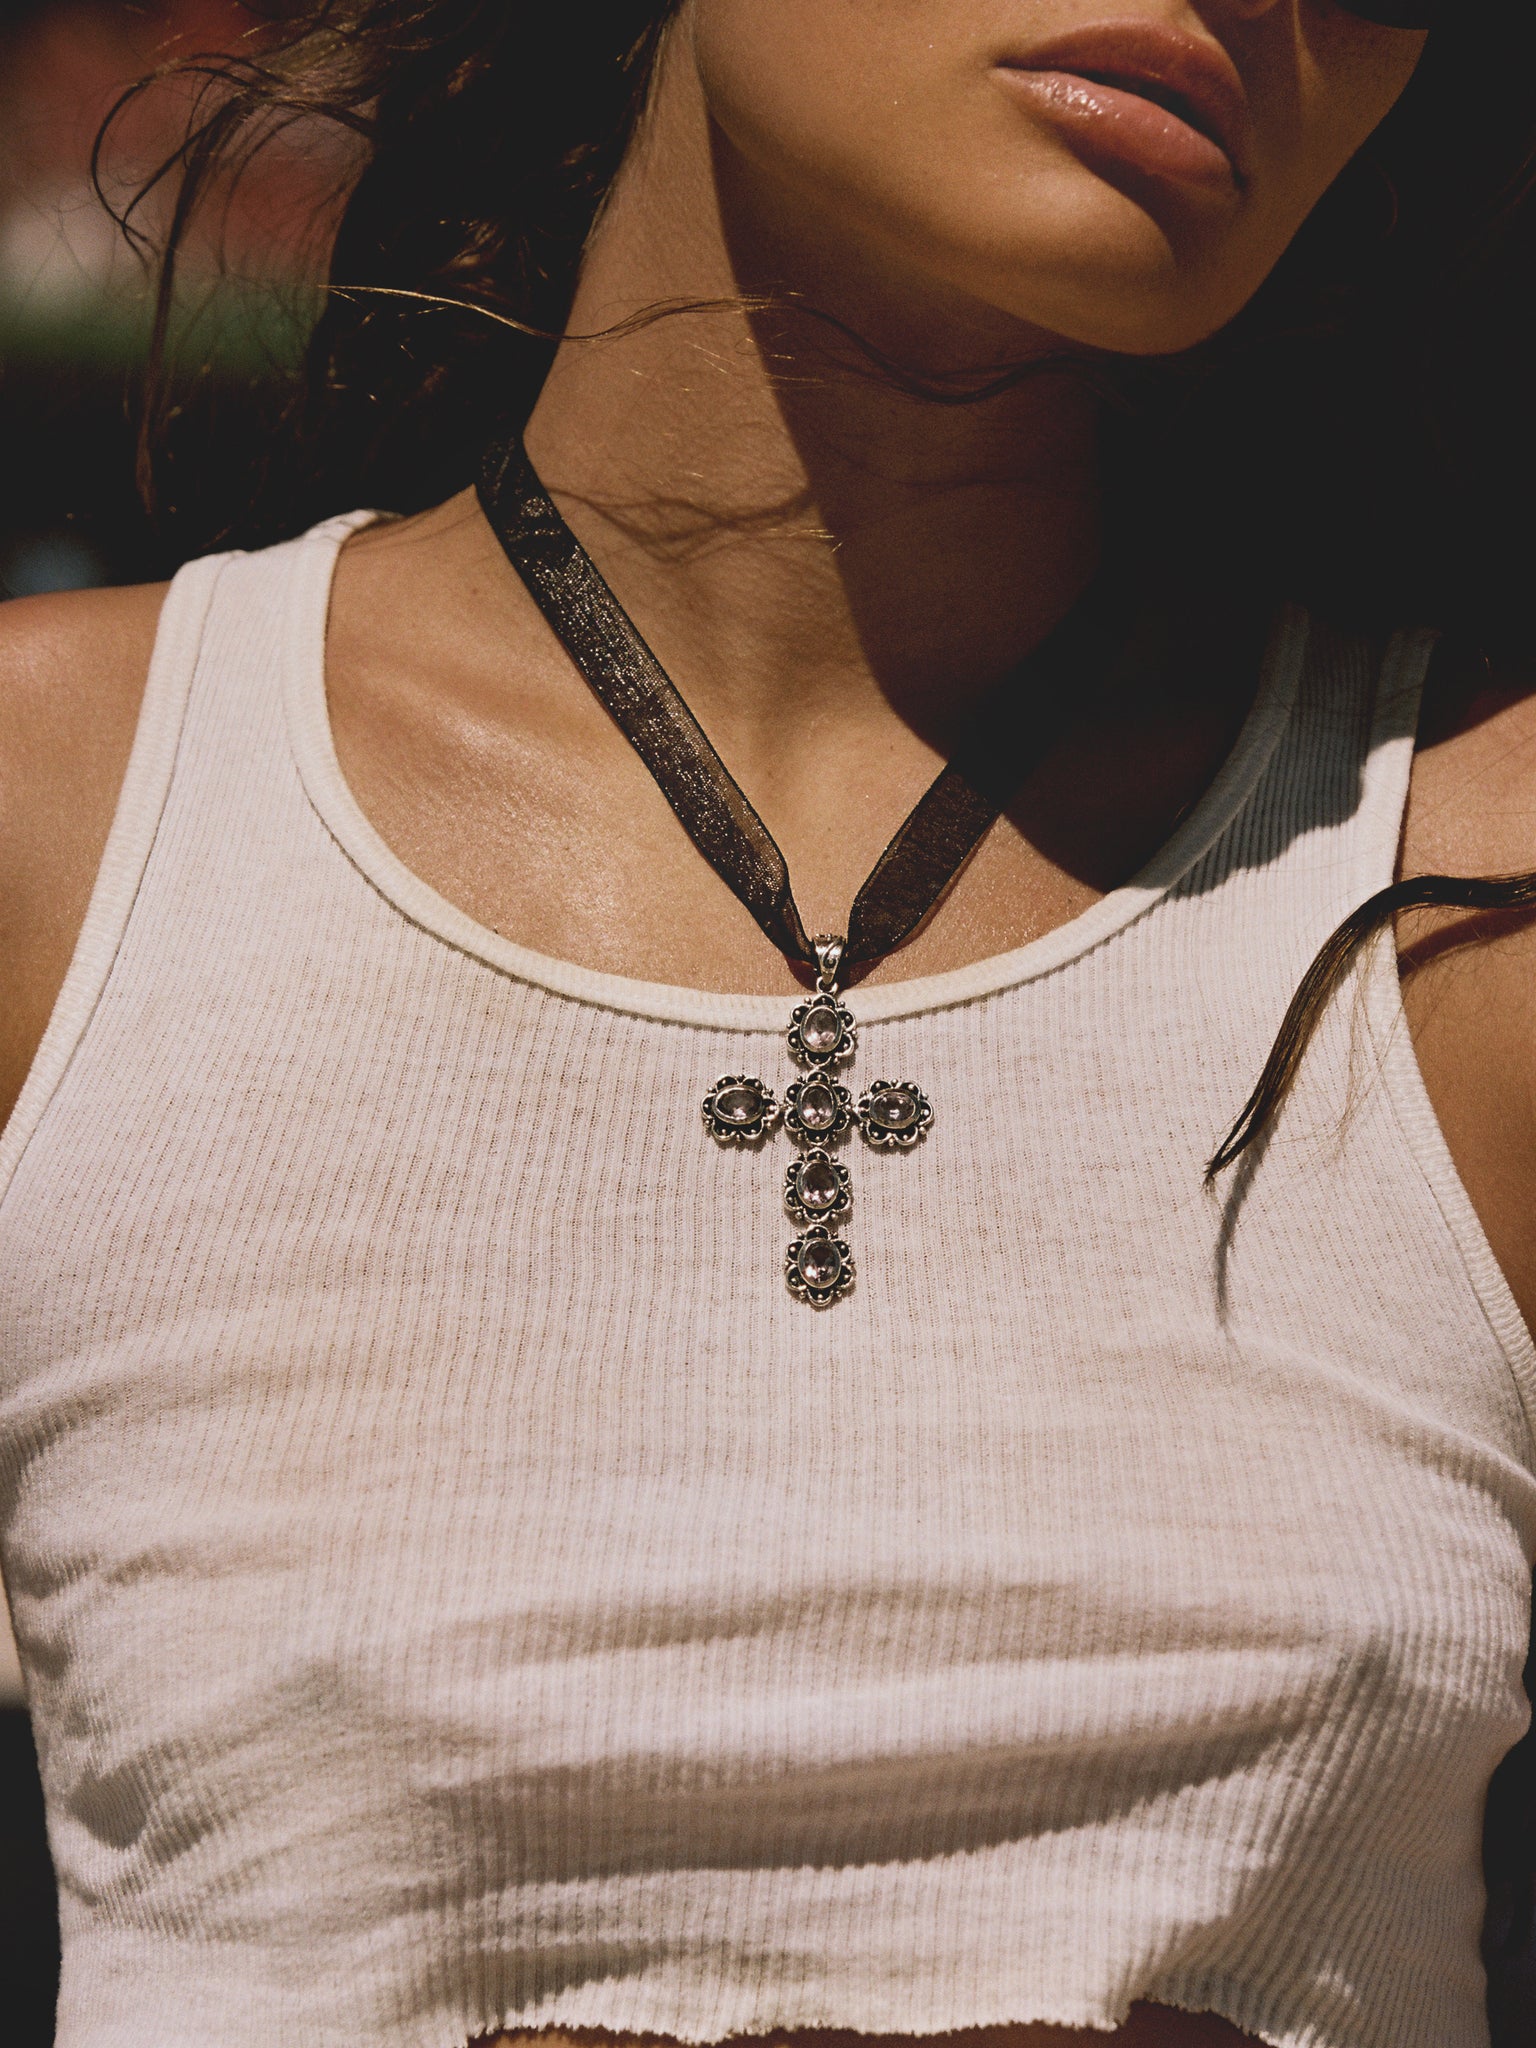 The Lana Cross Necklace